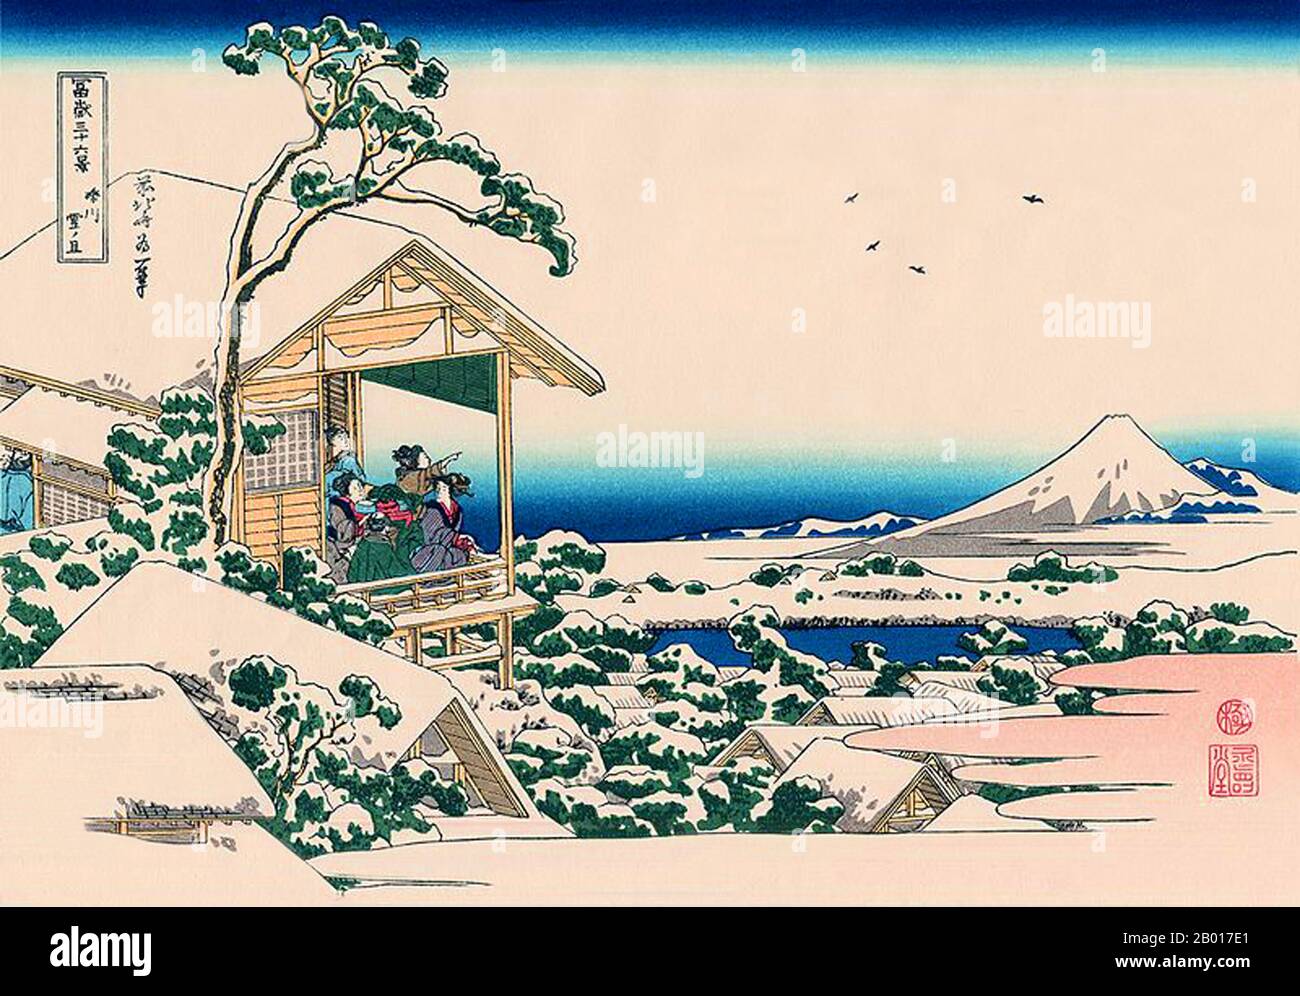 Japan: ‘Koishikawa in the Morning after a Snowfall’. Ukiyo-e woodblock print from the series ‘Thirty-Six Views of Mount Fuji’ by Katsushika Hokusai (31 October 1760 - 10 May 1849), 1830.  ‘Thirty-six Views of Mount Fuji’ is an ‘ukiyo-e’ series of woodcut prints by Japanese artist Katsushika Hokusai. The series depicts Mount Fuji in differing seasons and weather conditions from a variety of places and distances. It actually consists of 46 prints created between 1826 and 1833. The first 36 were included in the original publication and, due to their popularity, 10 more were added. Stock Photo